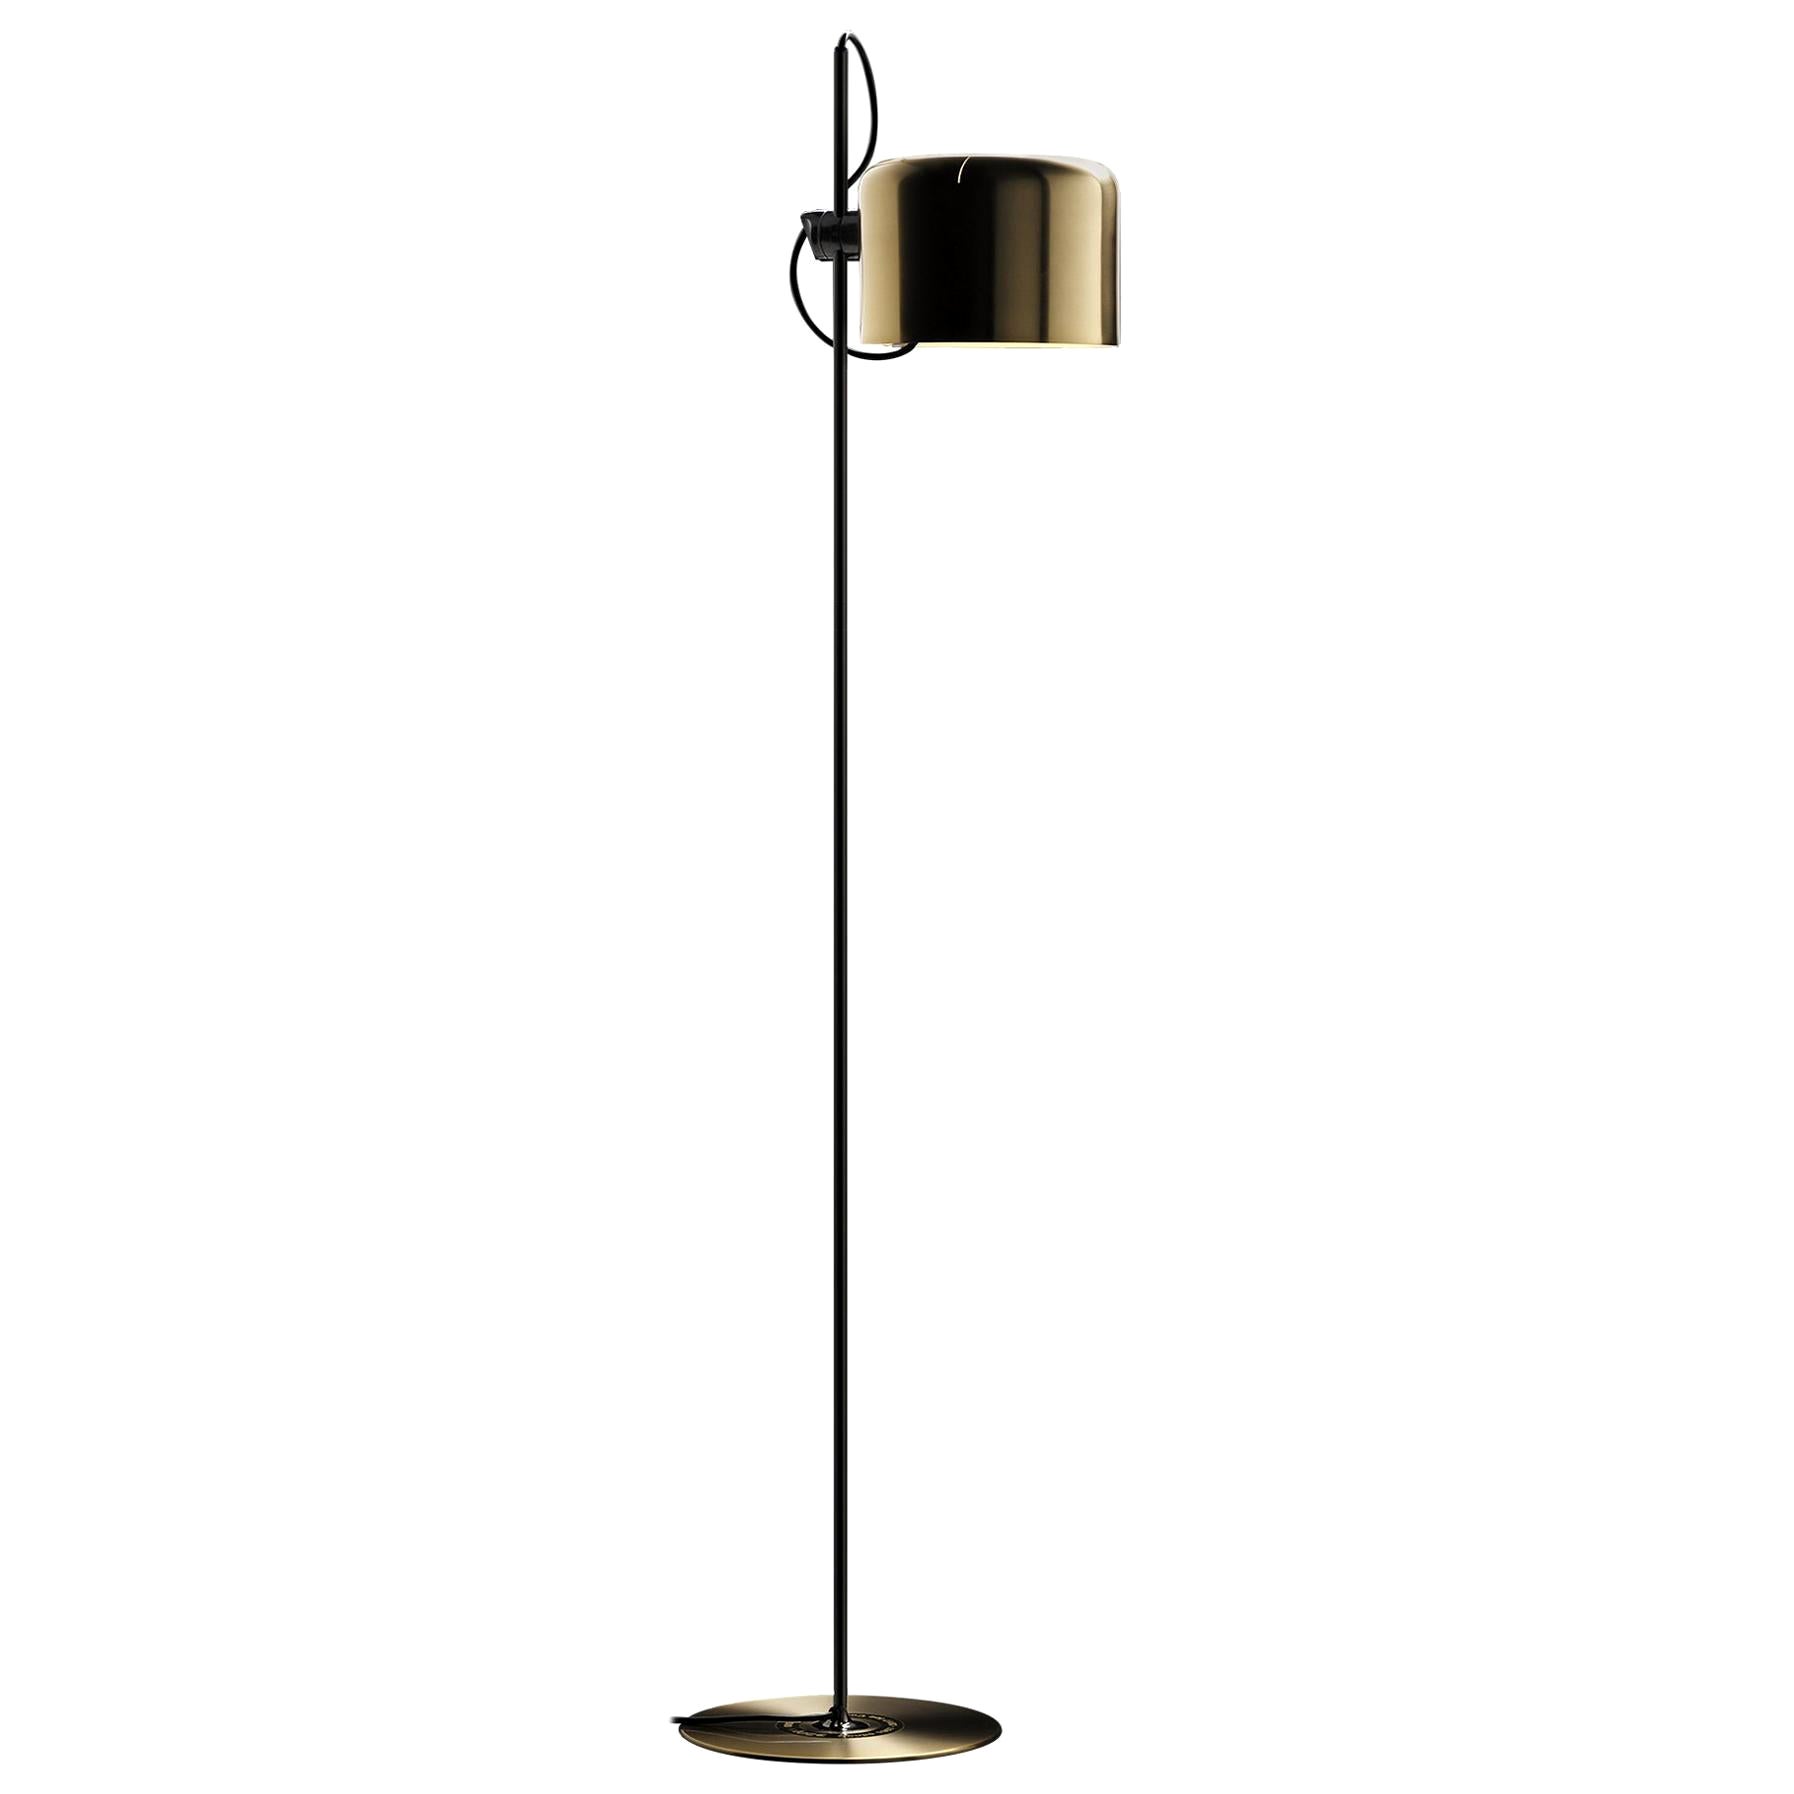 Joe Colombo Limited Edition Floor Lamp 'Coupé' Gold by Oluce For Sale